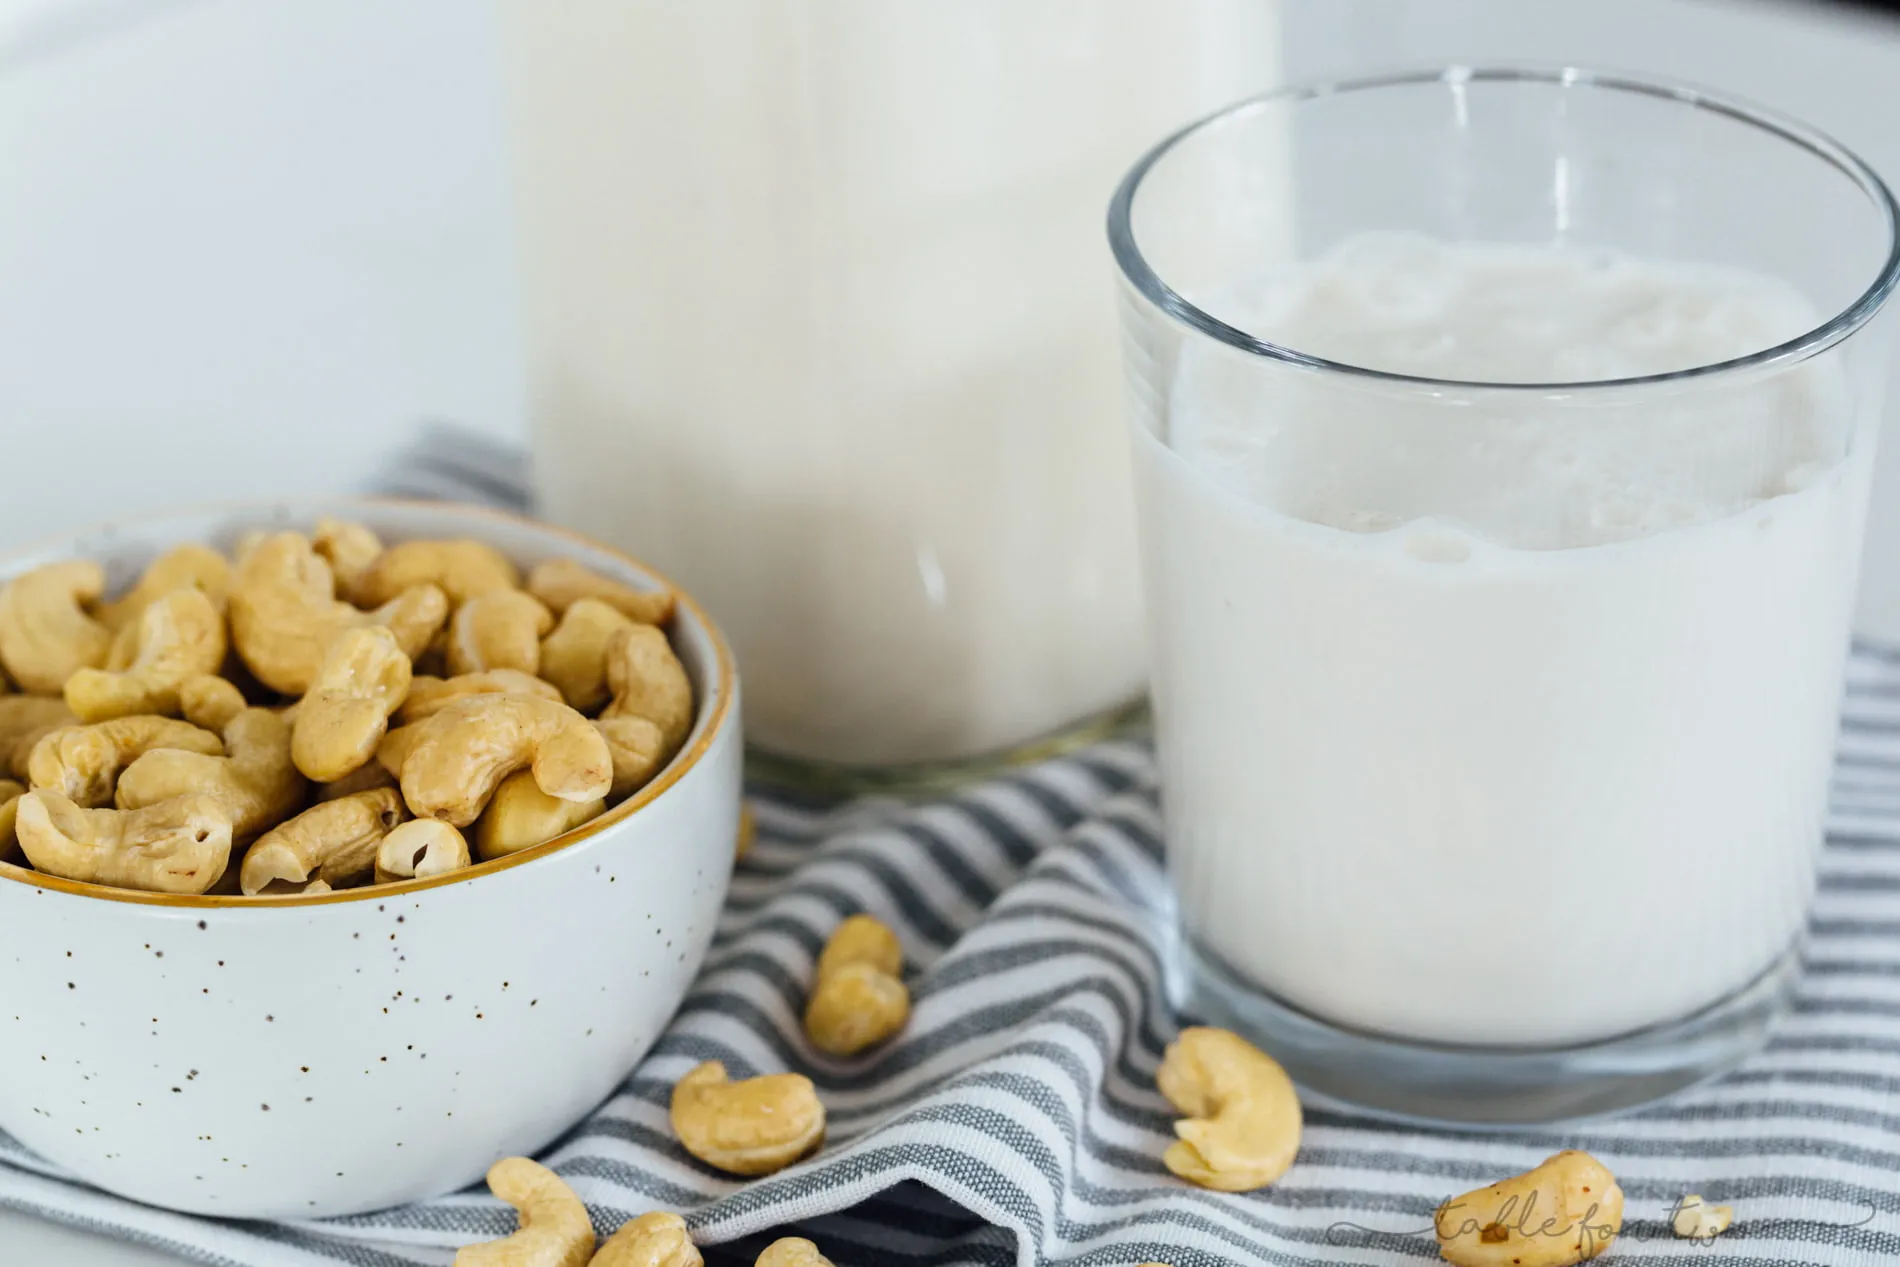 Cashew milk helps prevent cancer and cardiovascular diseases, suitable for everyone, especially pregnant women, children, and the elderly.